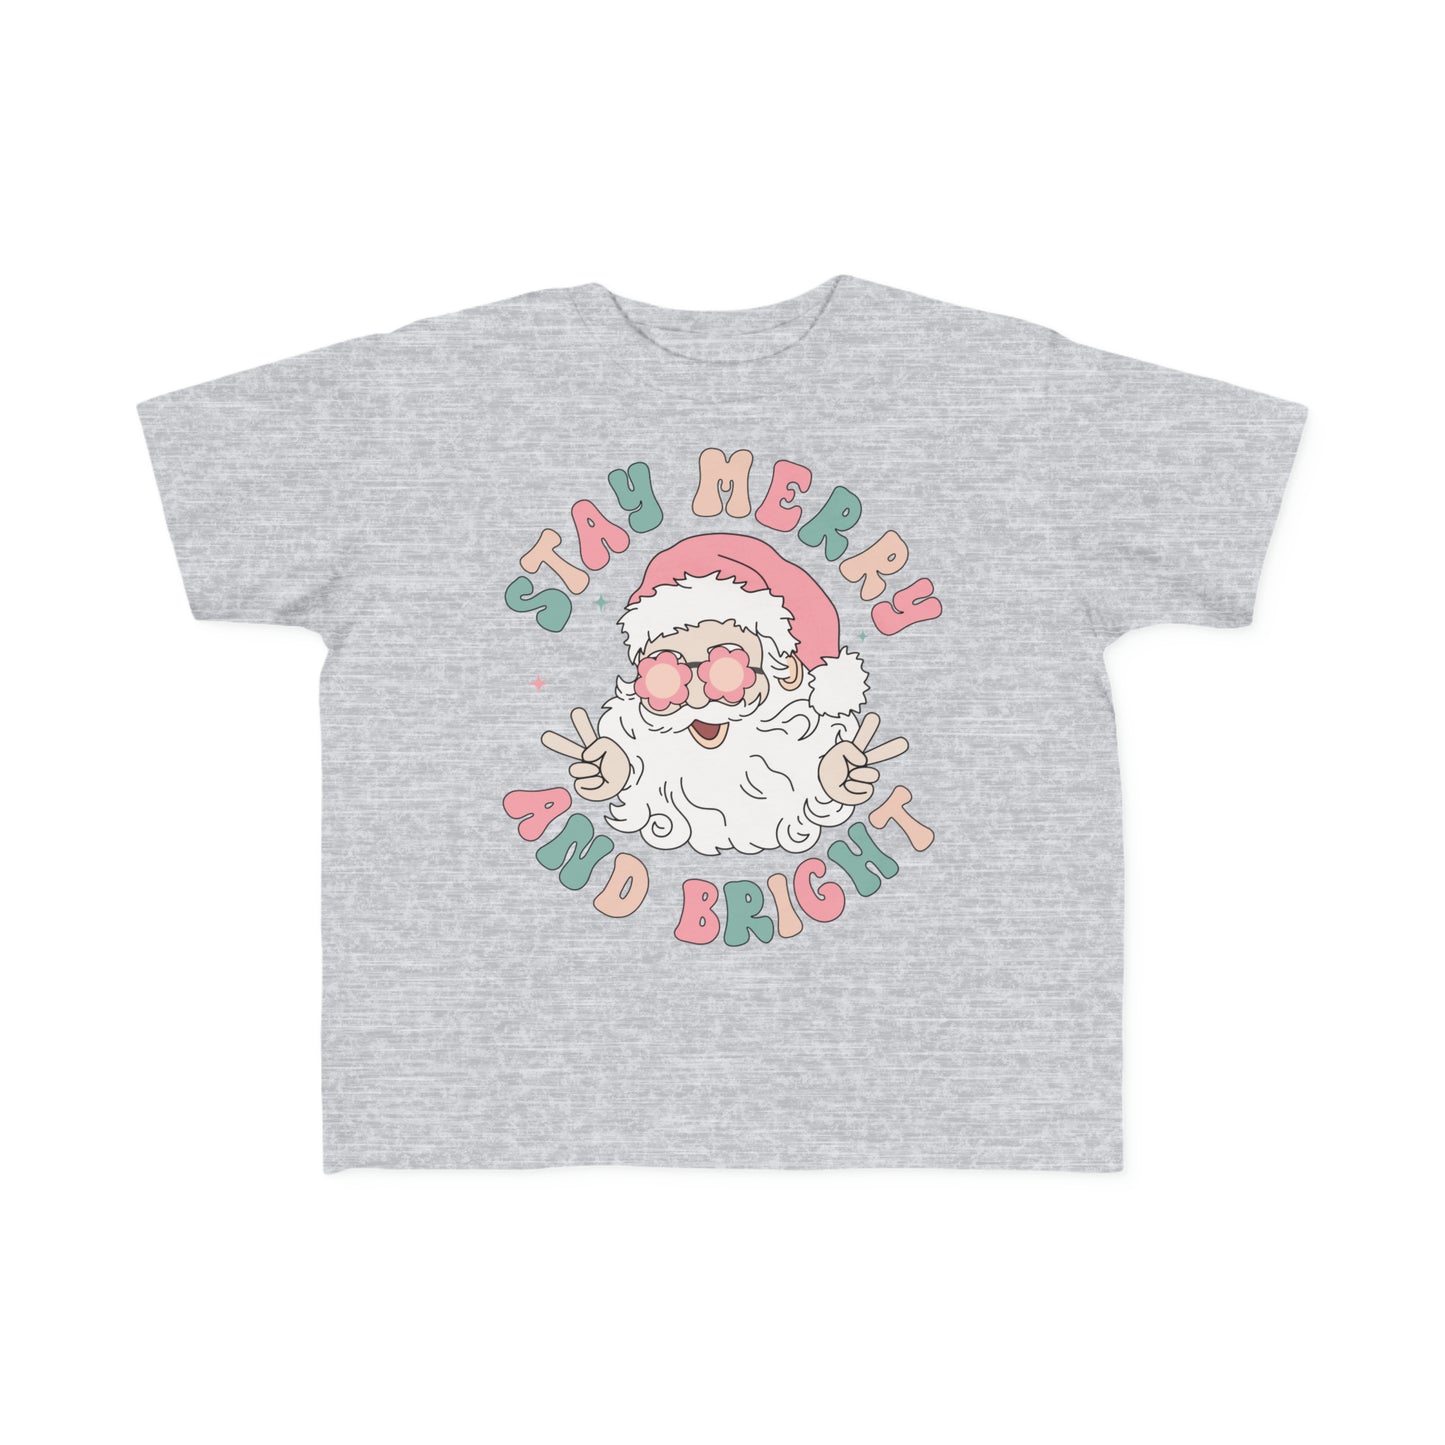 Stay Merry and Bright Christmas Tree Toddler's Fine Jersey Tee